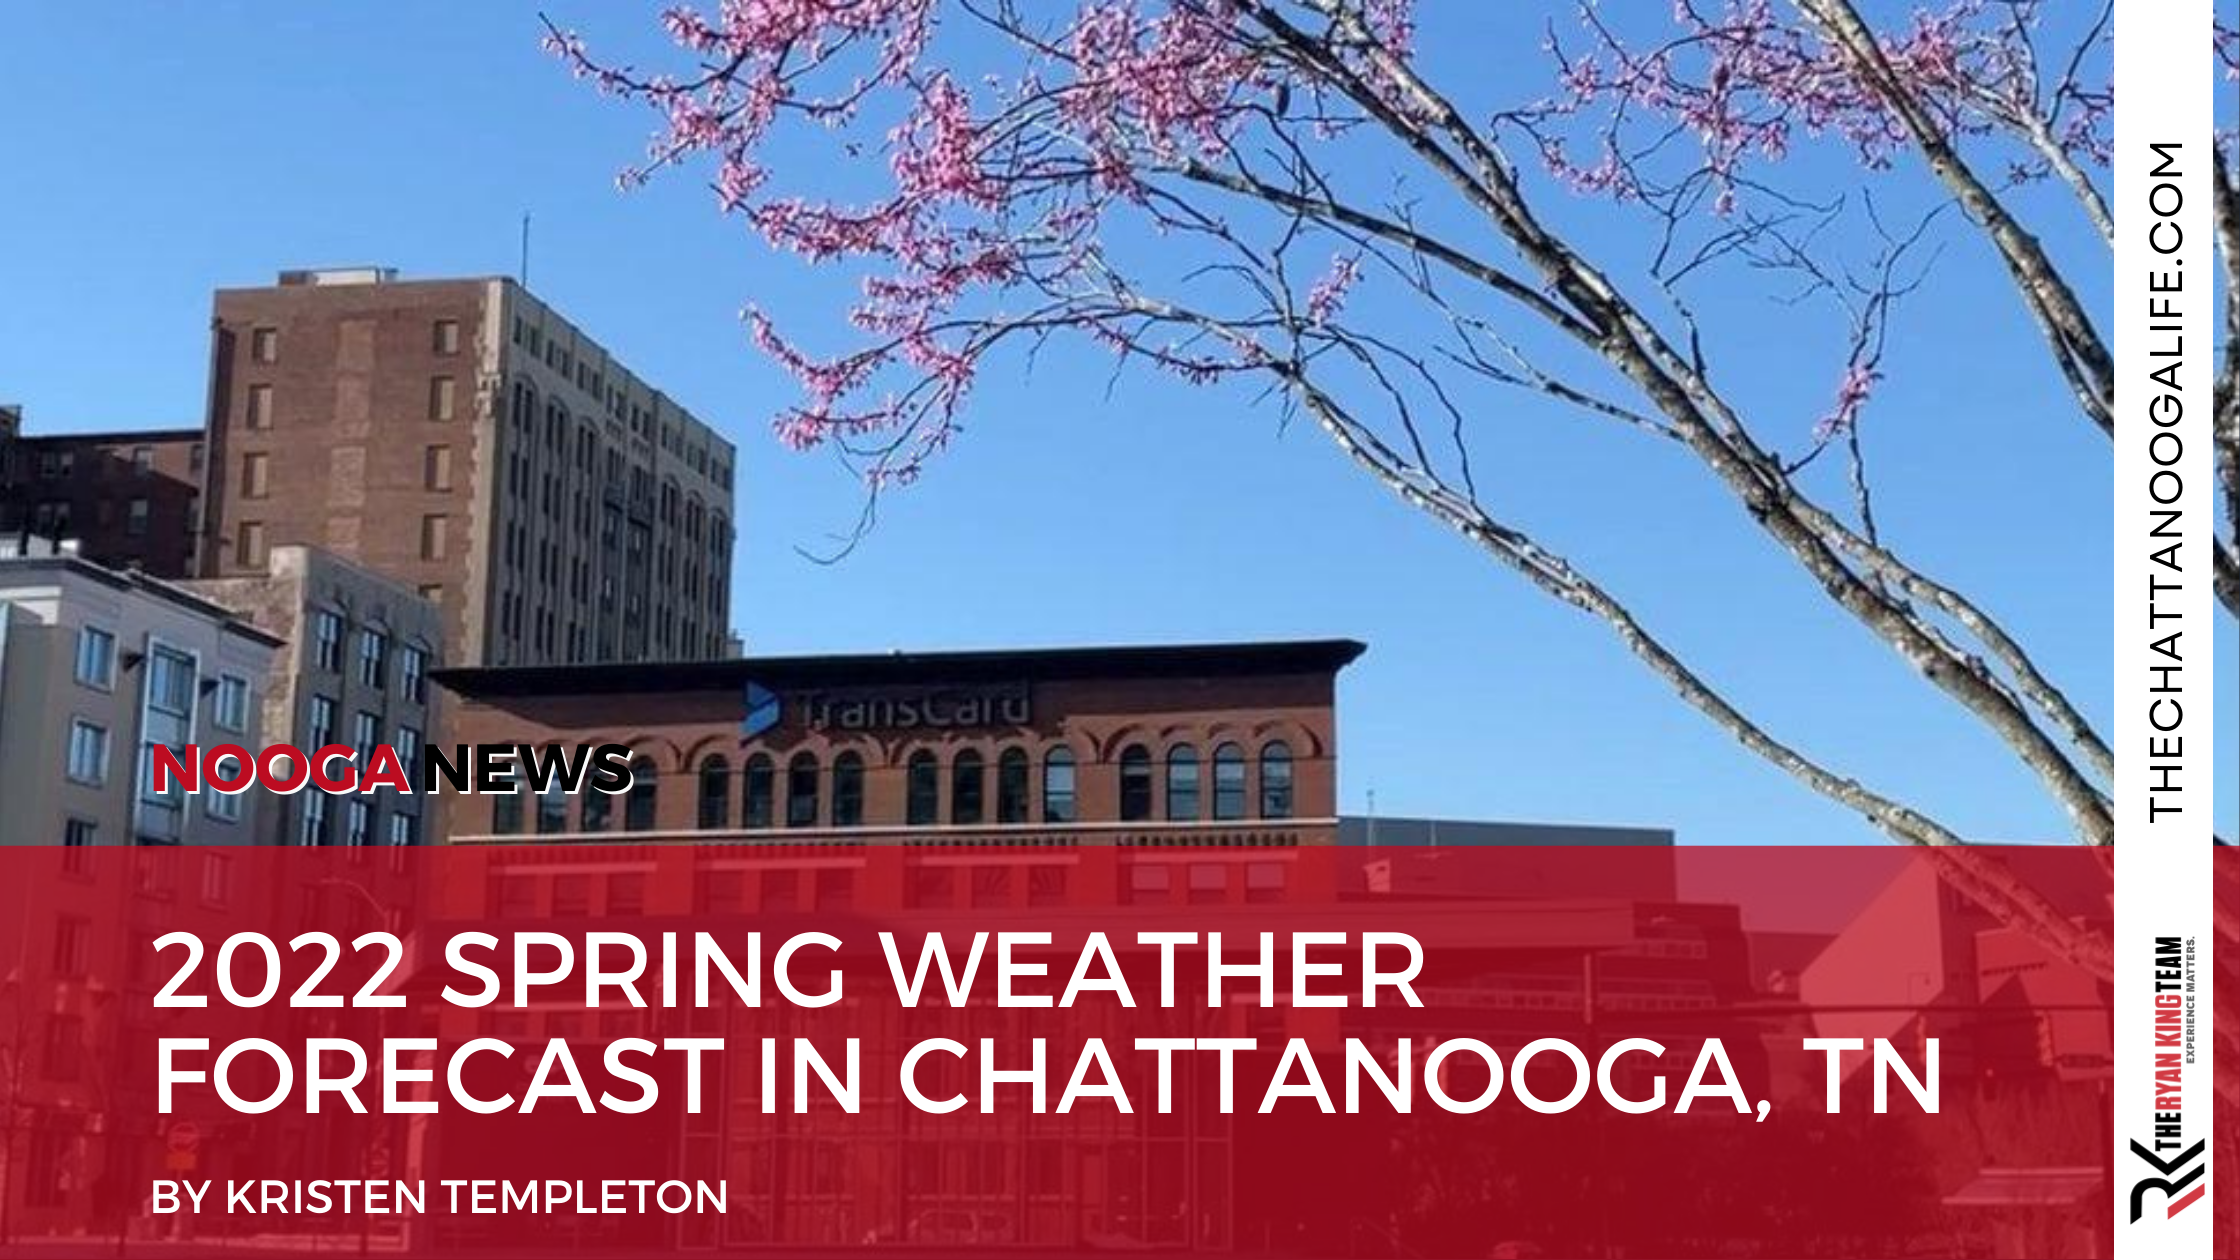 2022 Spring weather forecast in Chattanooga, TN